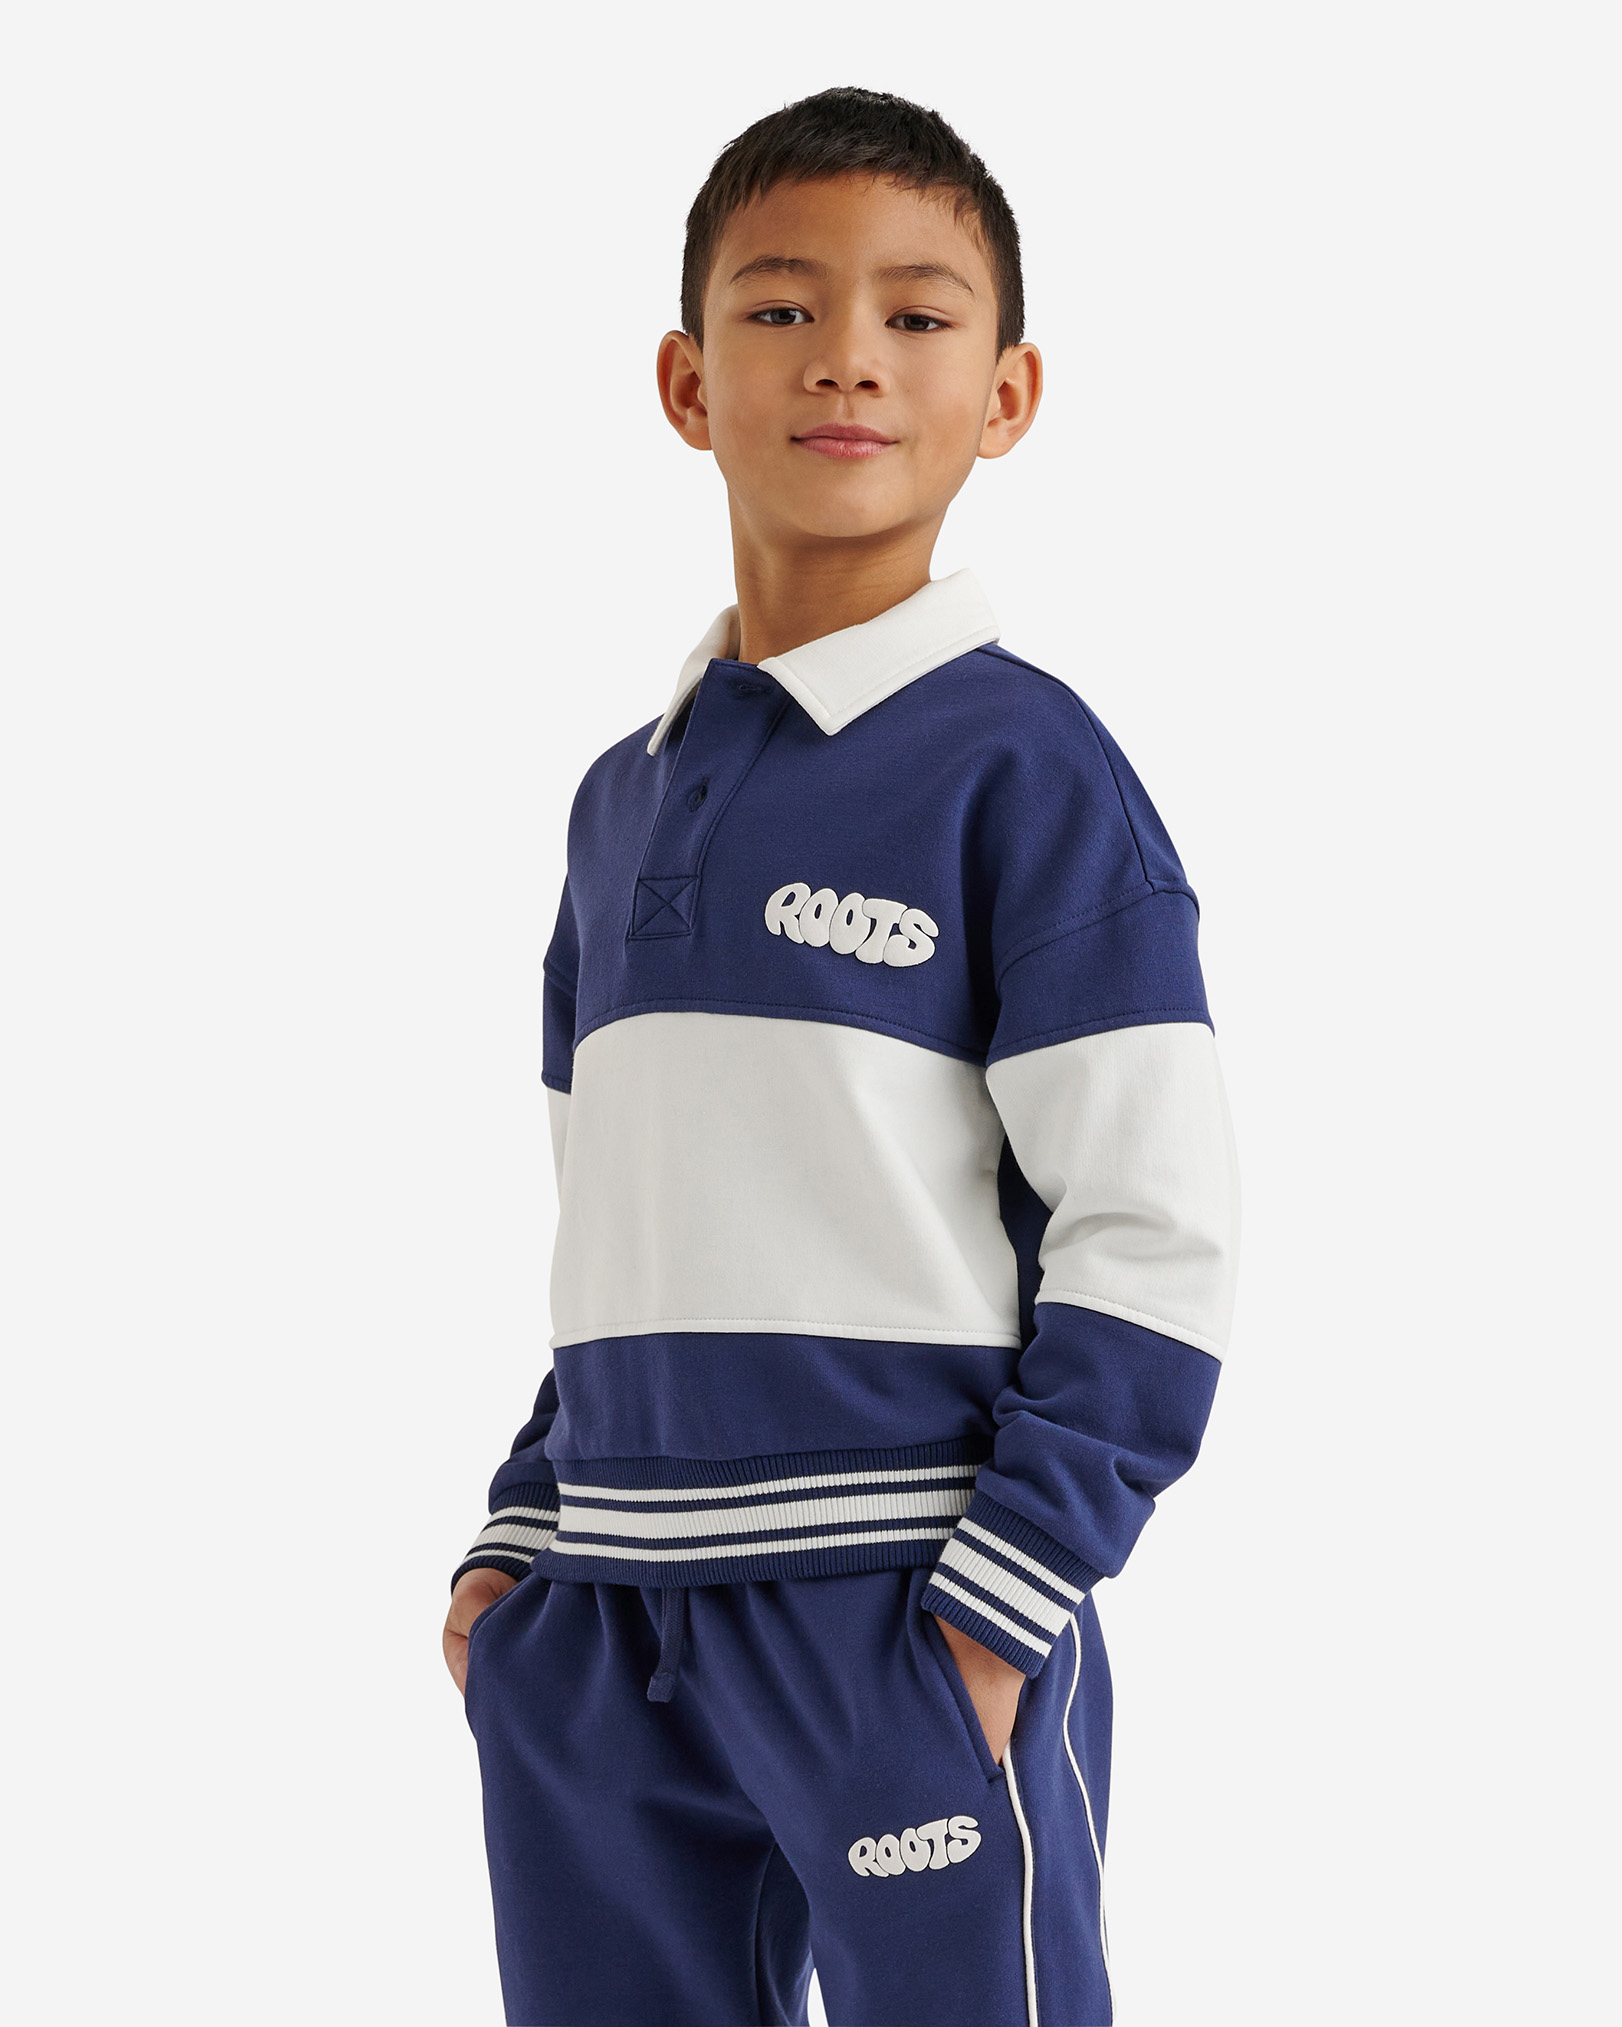 Roots Kids Active Polo Jacket in Naval Blue